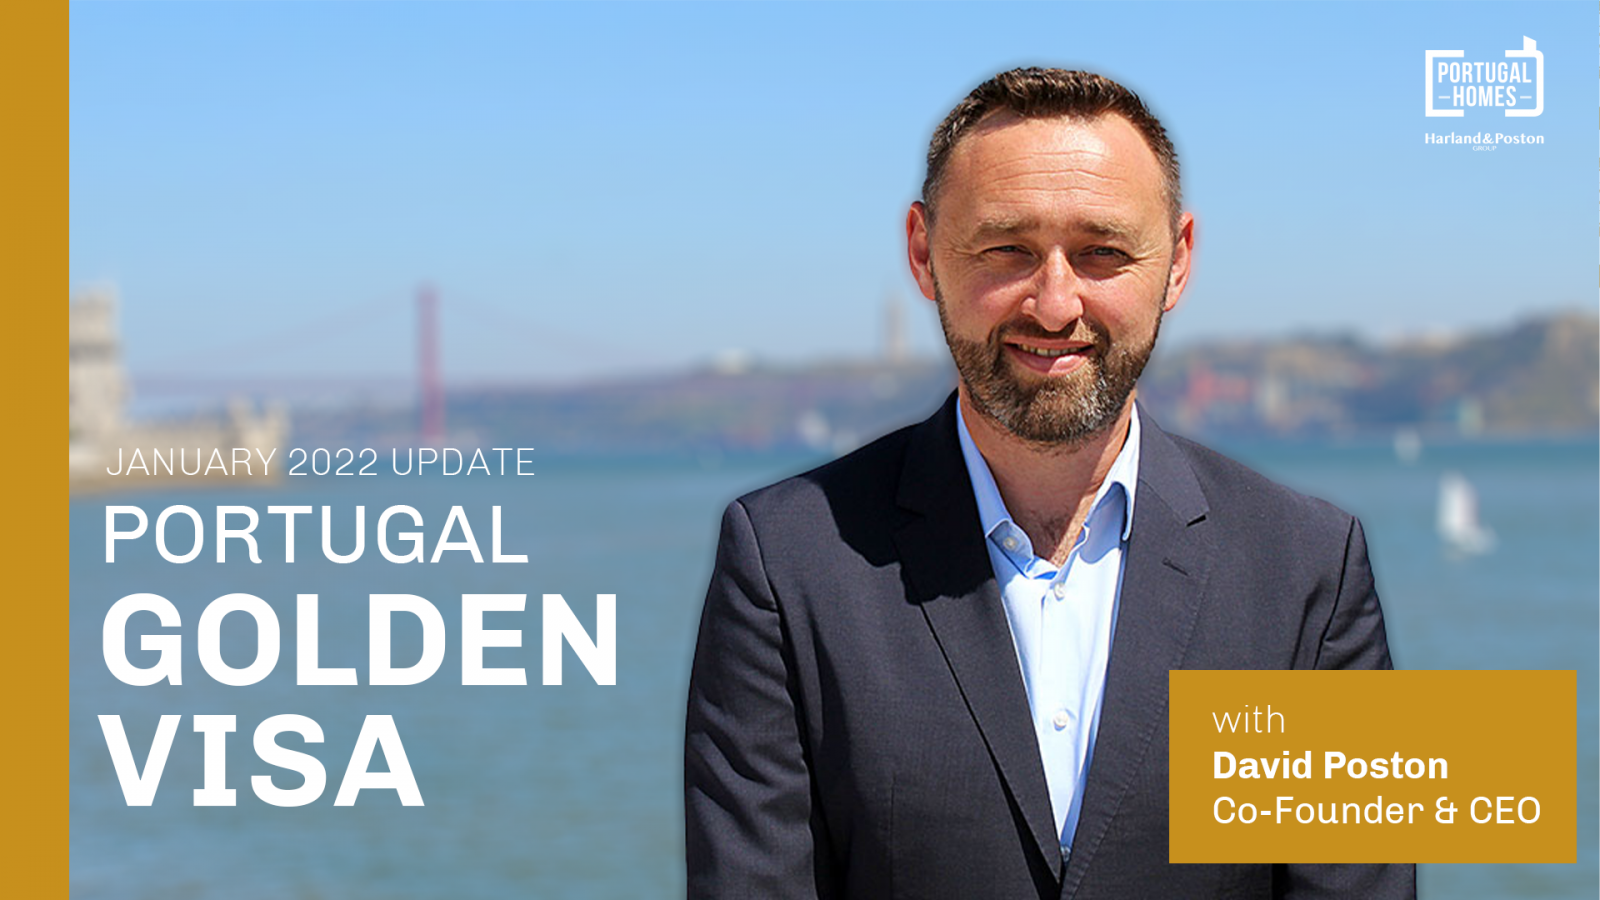 See the January 2022 update on Portugal Golden Visa.